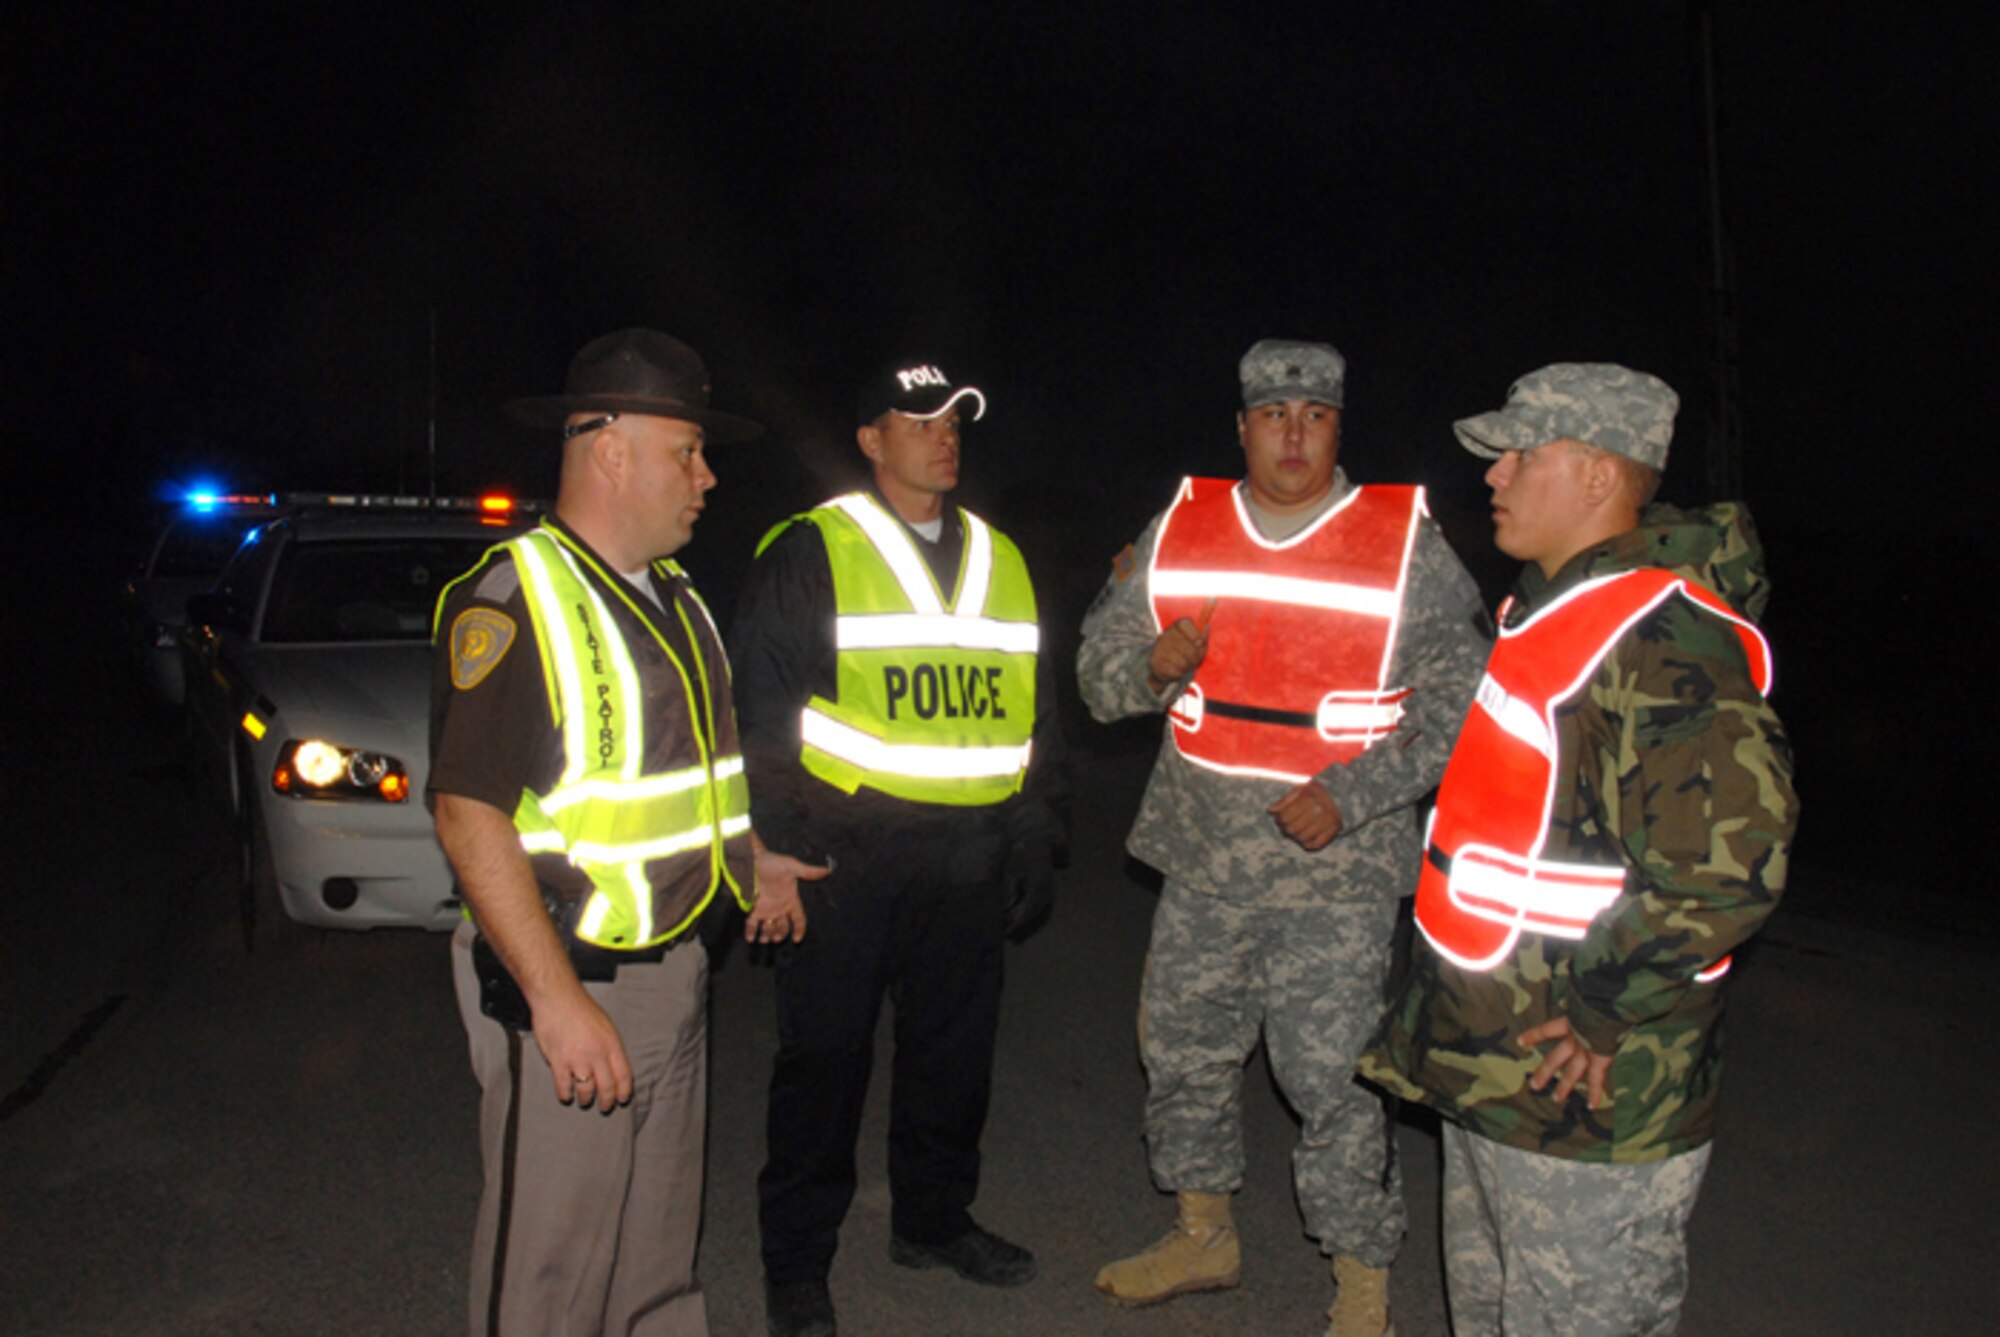 From right to left, Specialist Shane A. Korynta and Sergeant Danny J. Lemieux Jr., both of the 188th Engineer Company, assume security responsibilities at an entry control post on the outskirts of Northwood, N.D., from law enforcement officials Jeremy Hanson, Larimore, N.D., police chief, and N.D. Highway Patrol trooper Aaron Enzminger.  Entry to the town of Northwood was completely closed and secured by the North Dakota National Guard from 8 p.m. until 8 a.m. during the nights following an F4 tornado that hit Northwood, N.D., Sunday, Aug. 26. (USAF photo/Senior Master Sgt. David H. Lipp)